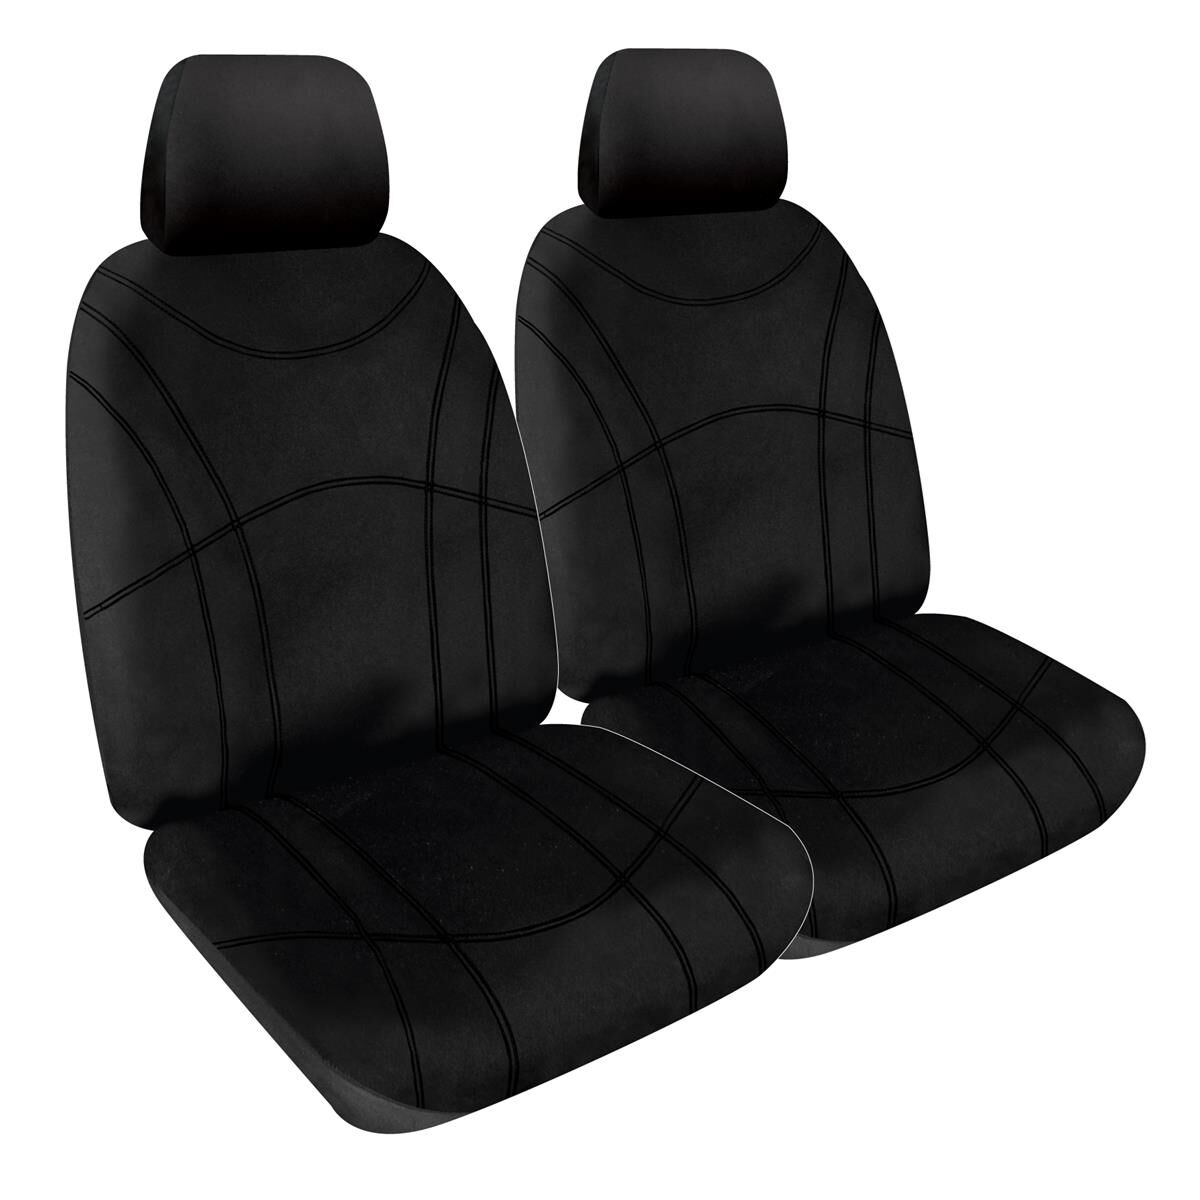 Getaway Neoprene Ready Made Seat Covers - Front, Black/Black